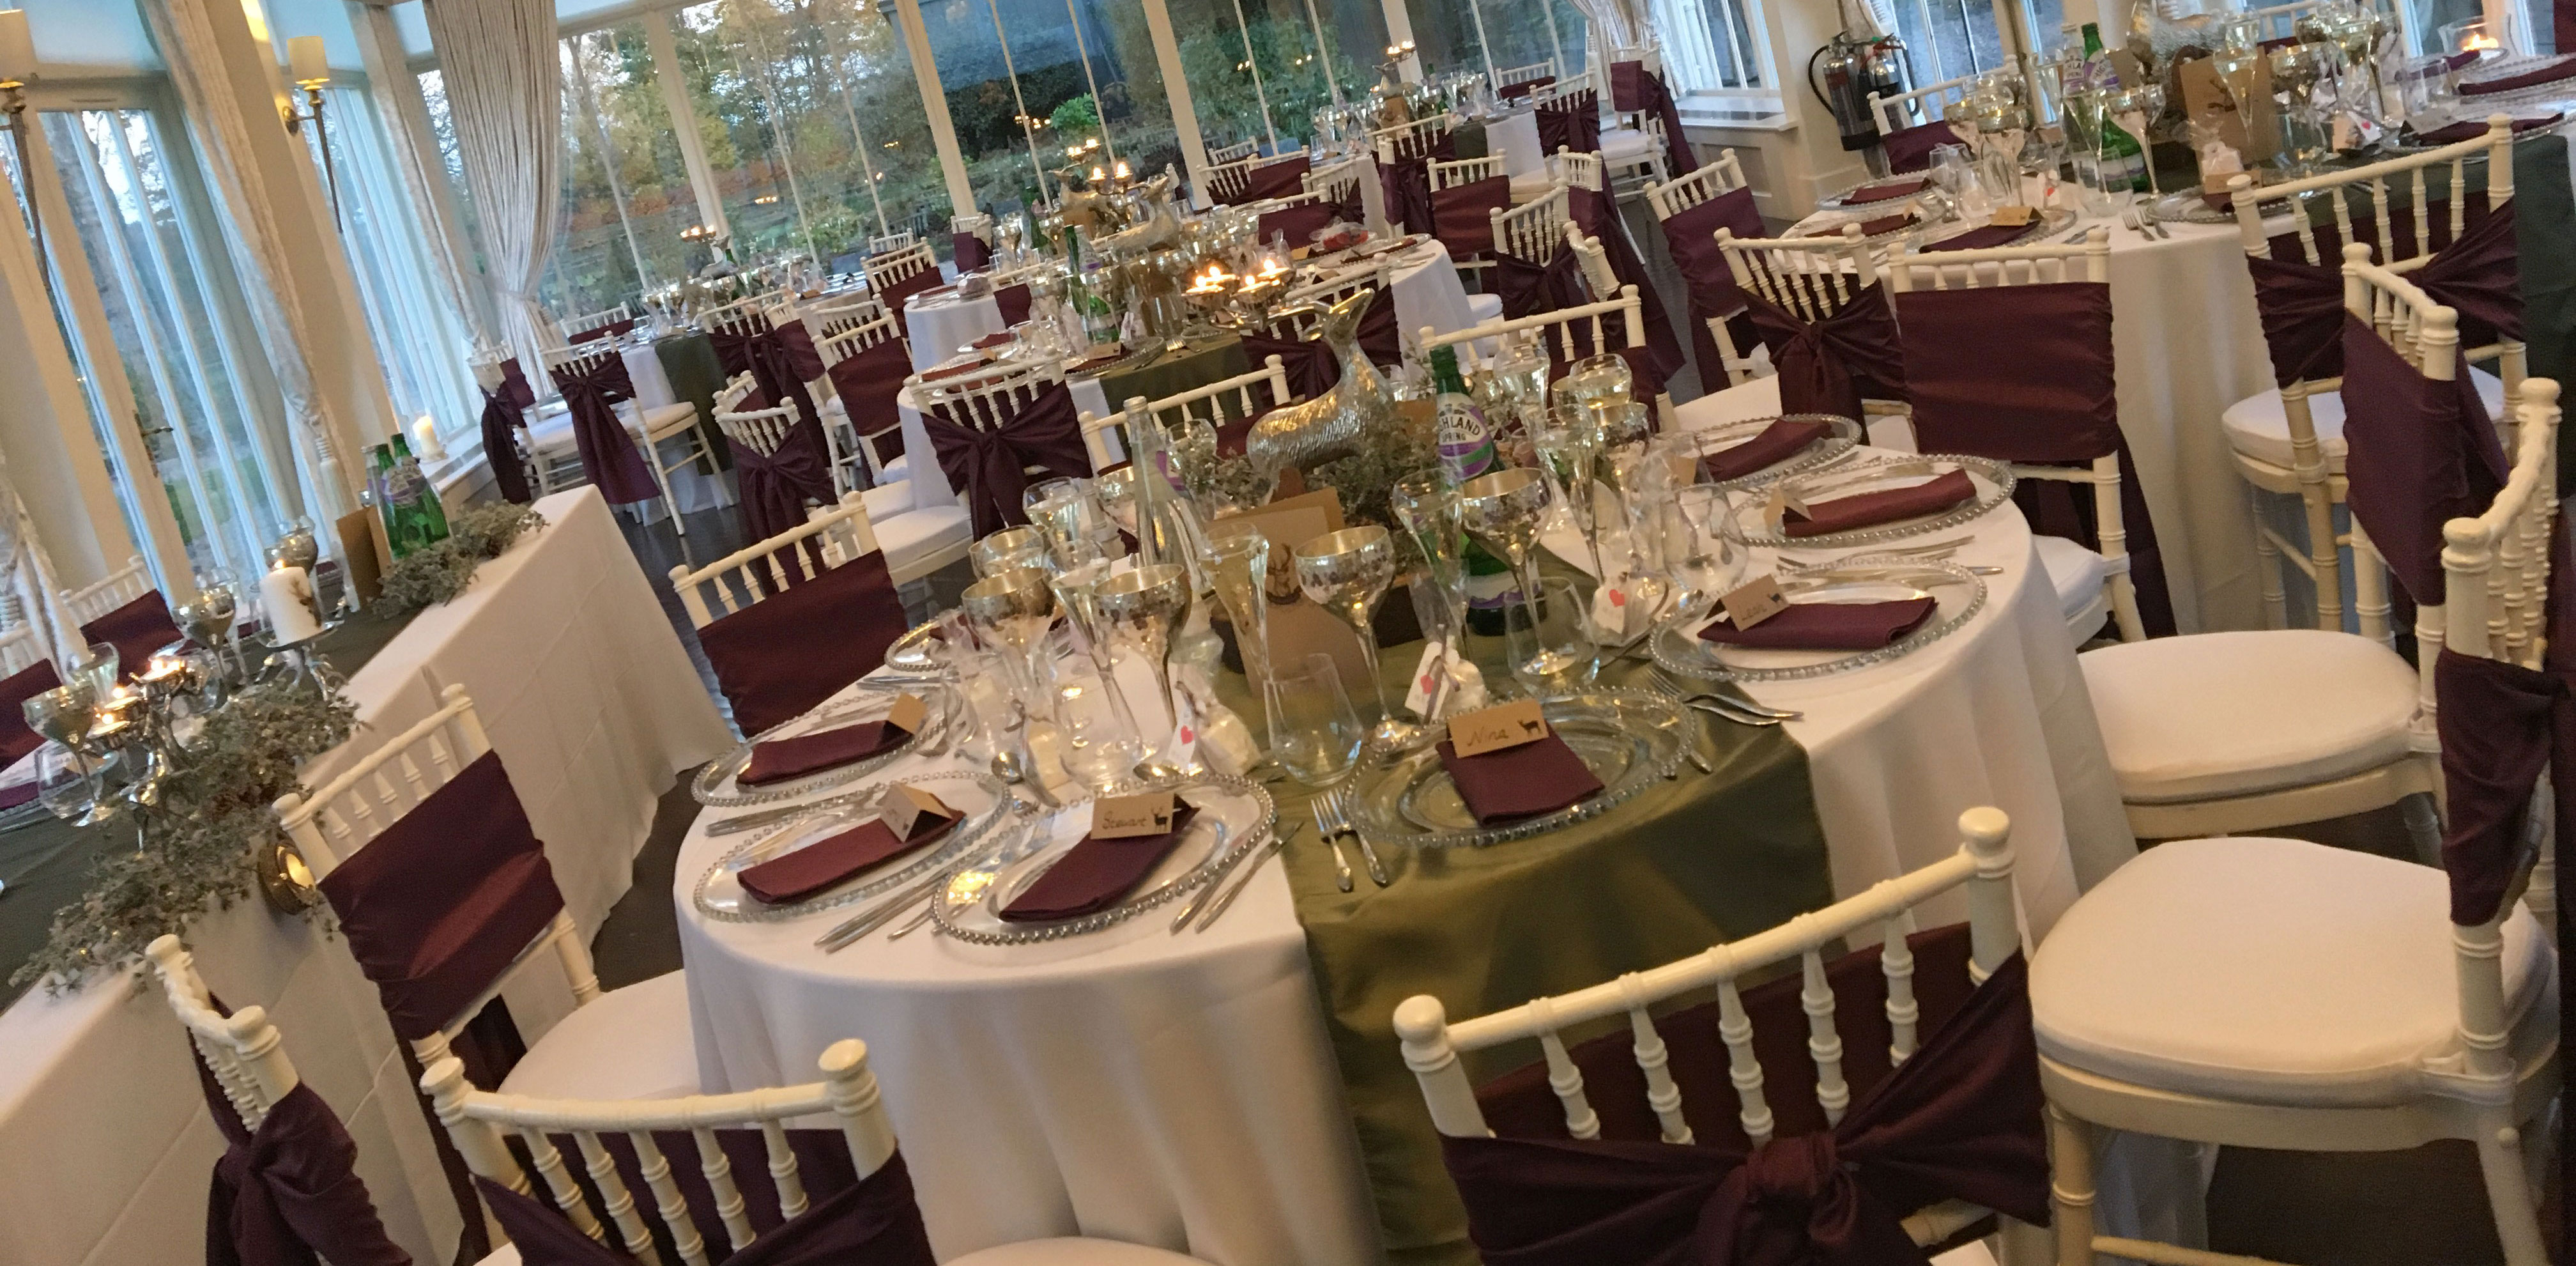 White Essential table linen, Woodland Taffeta runners,Silver Beaded charger plates paired with Plum Faux Silk napkins and Ivory Chiavari Chairs with White Essential Cushioned Seat Pads and Plum Faux Silk seat ties